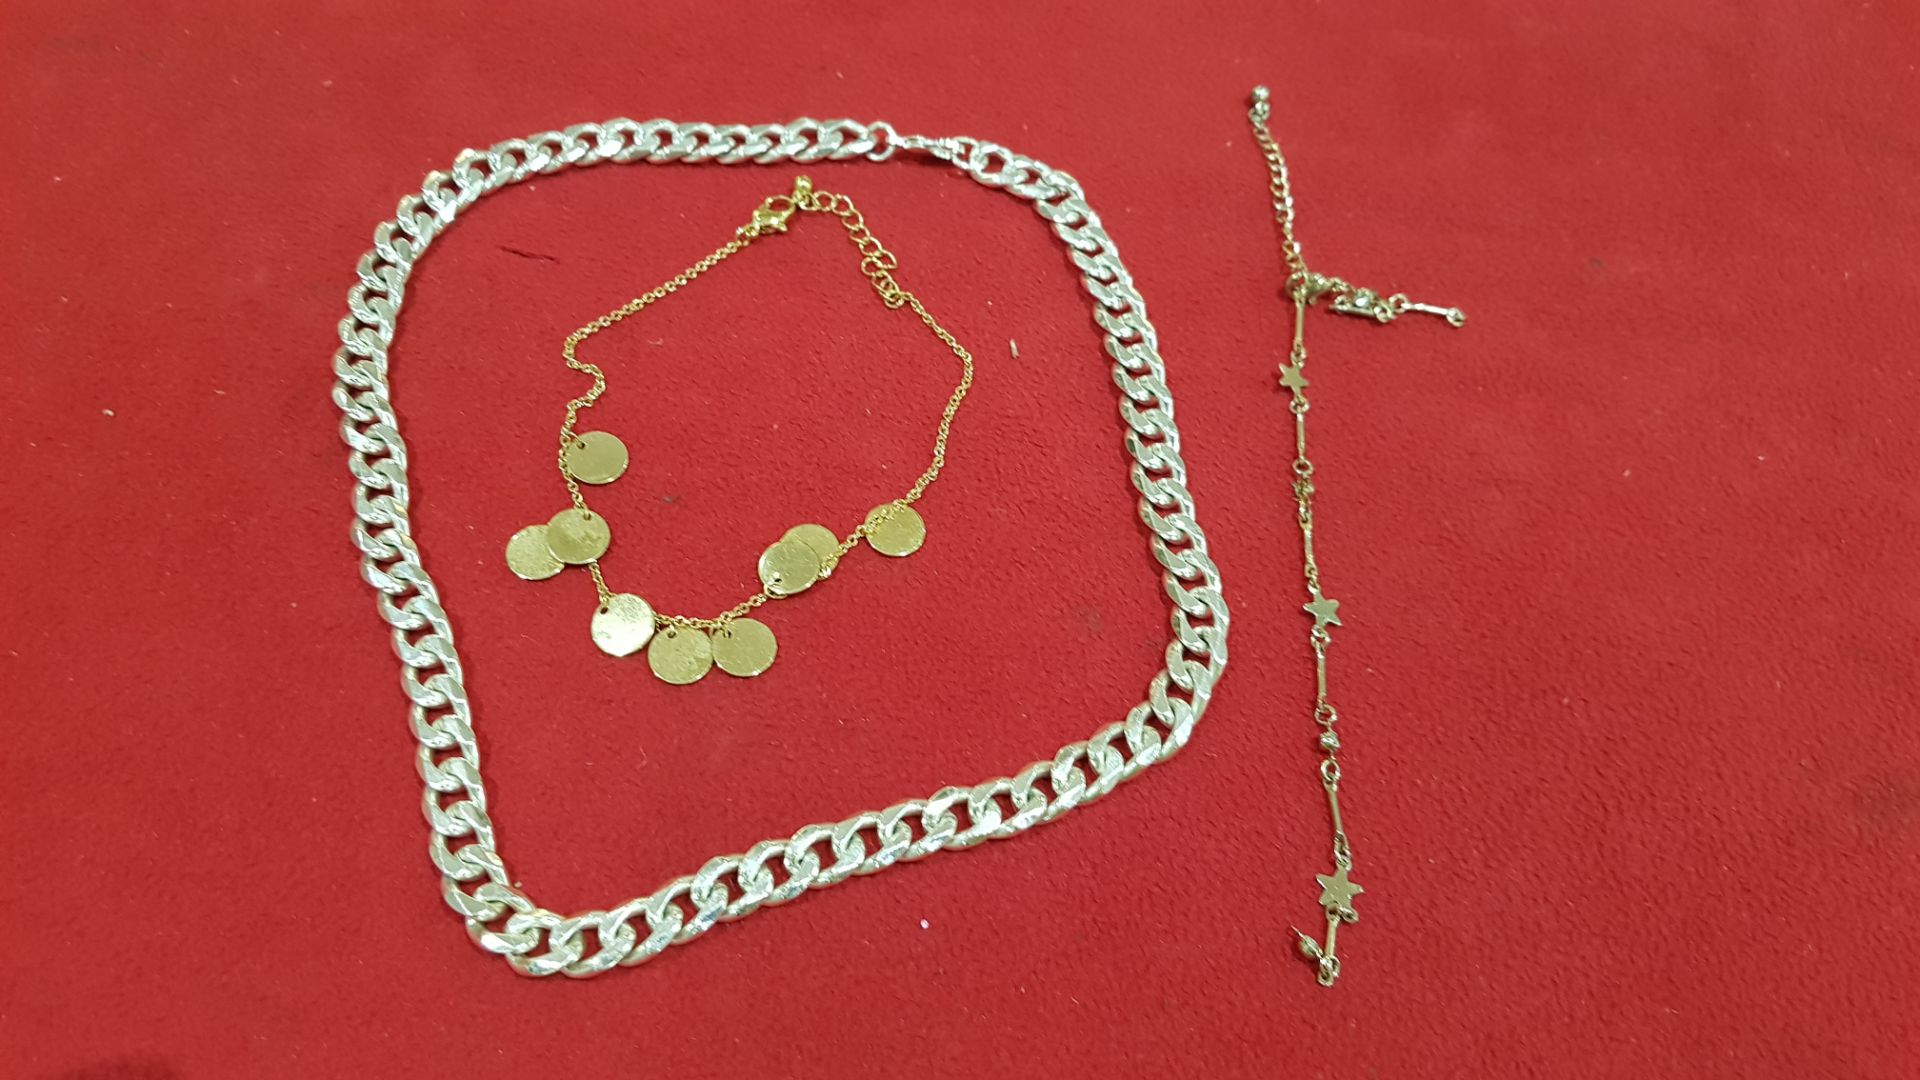 3 PIECE ASSORTED JEWELLERY LOT CONTAINING 1 X SILVER COLOURED CHAIN NECKLACE, 1 X GOLD COLOURED